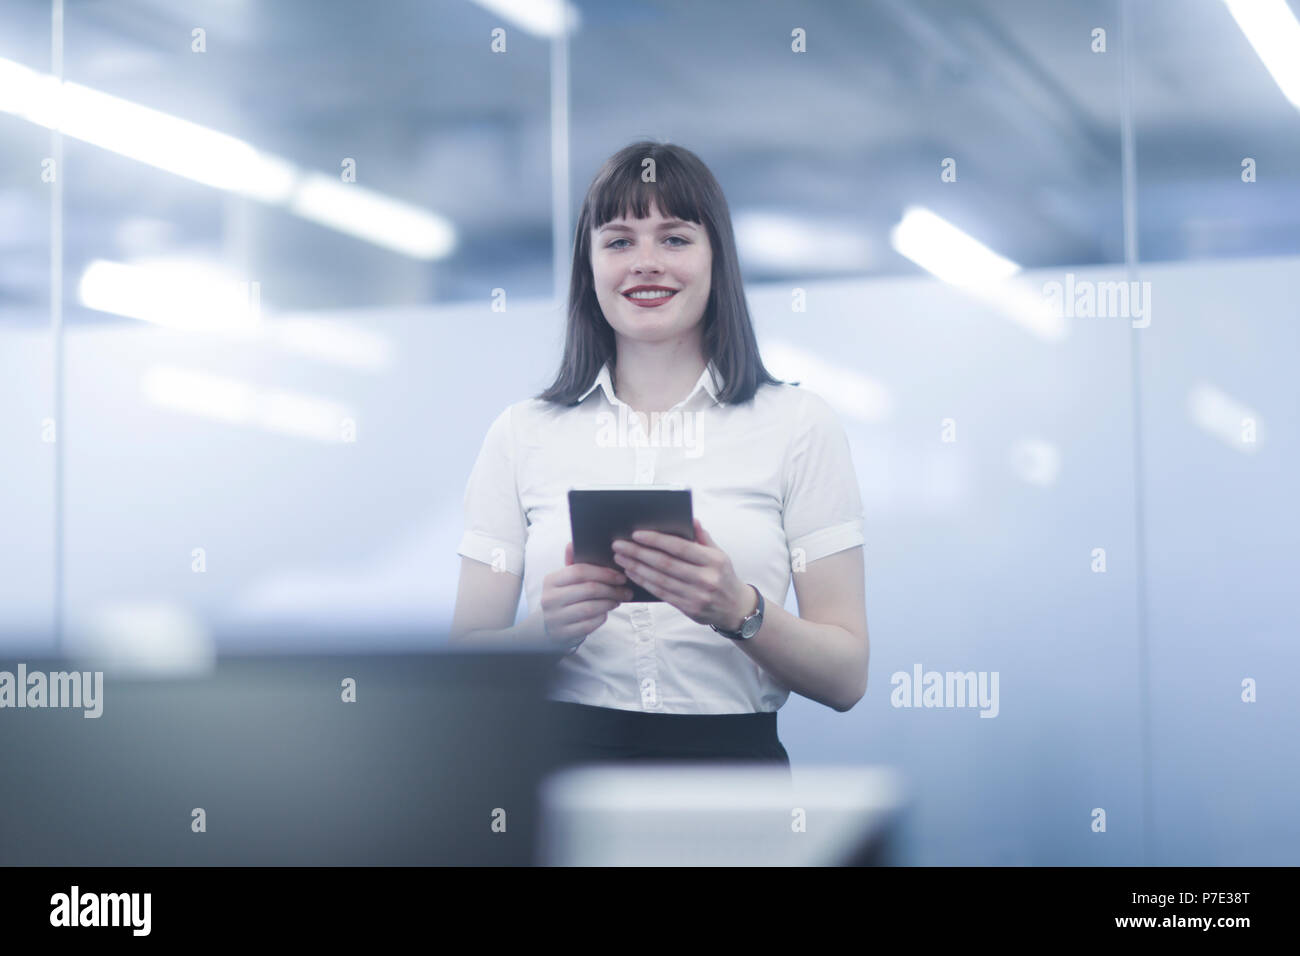 Businesswoman using digital tablet, looking at camera smiling Stock Photo